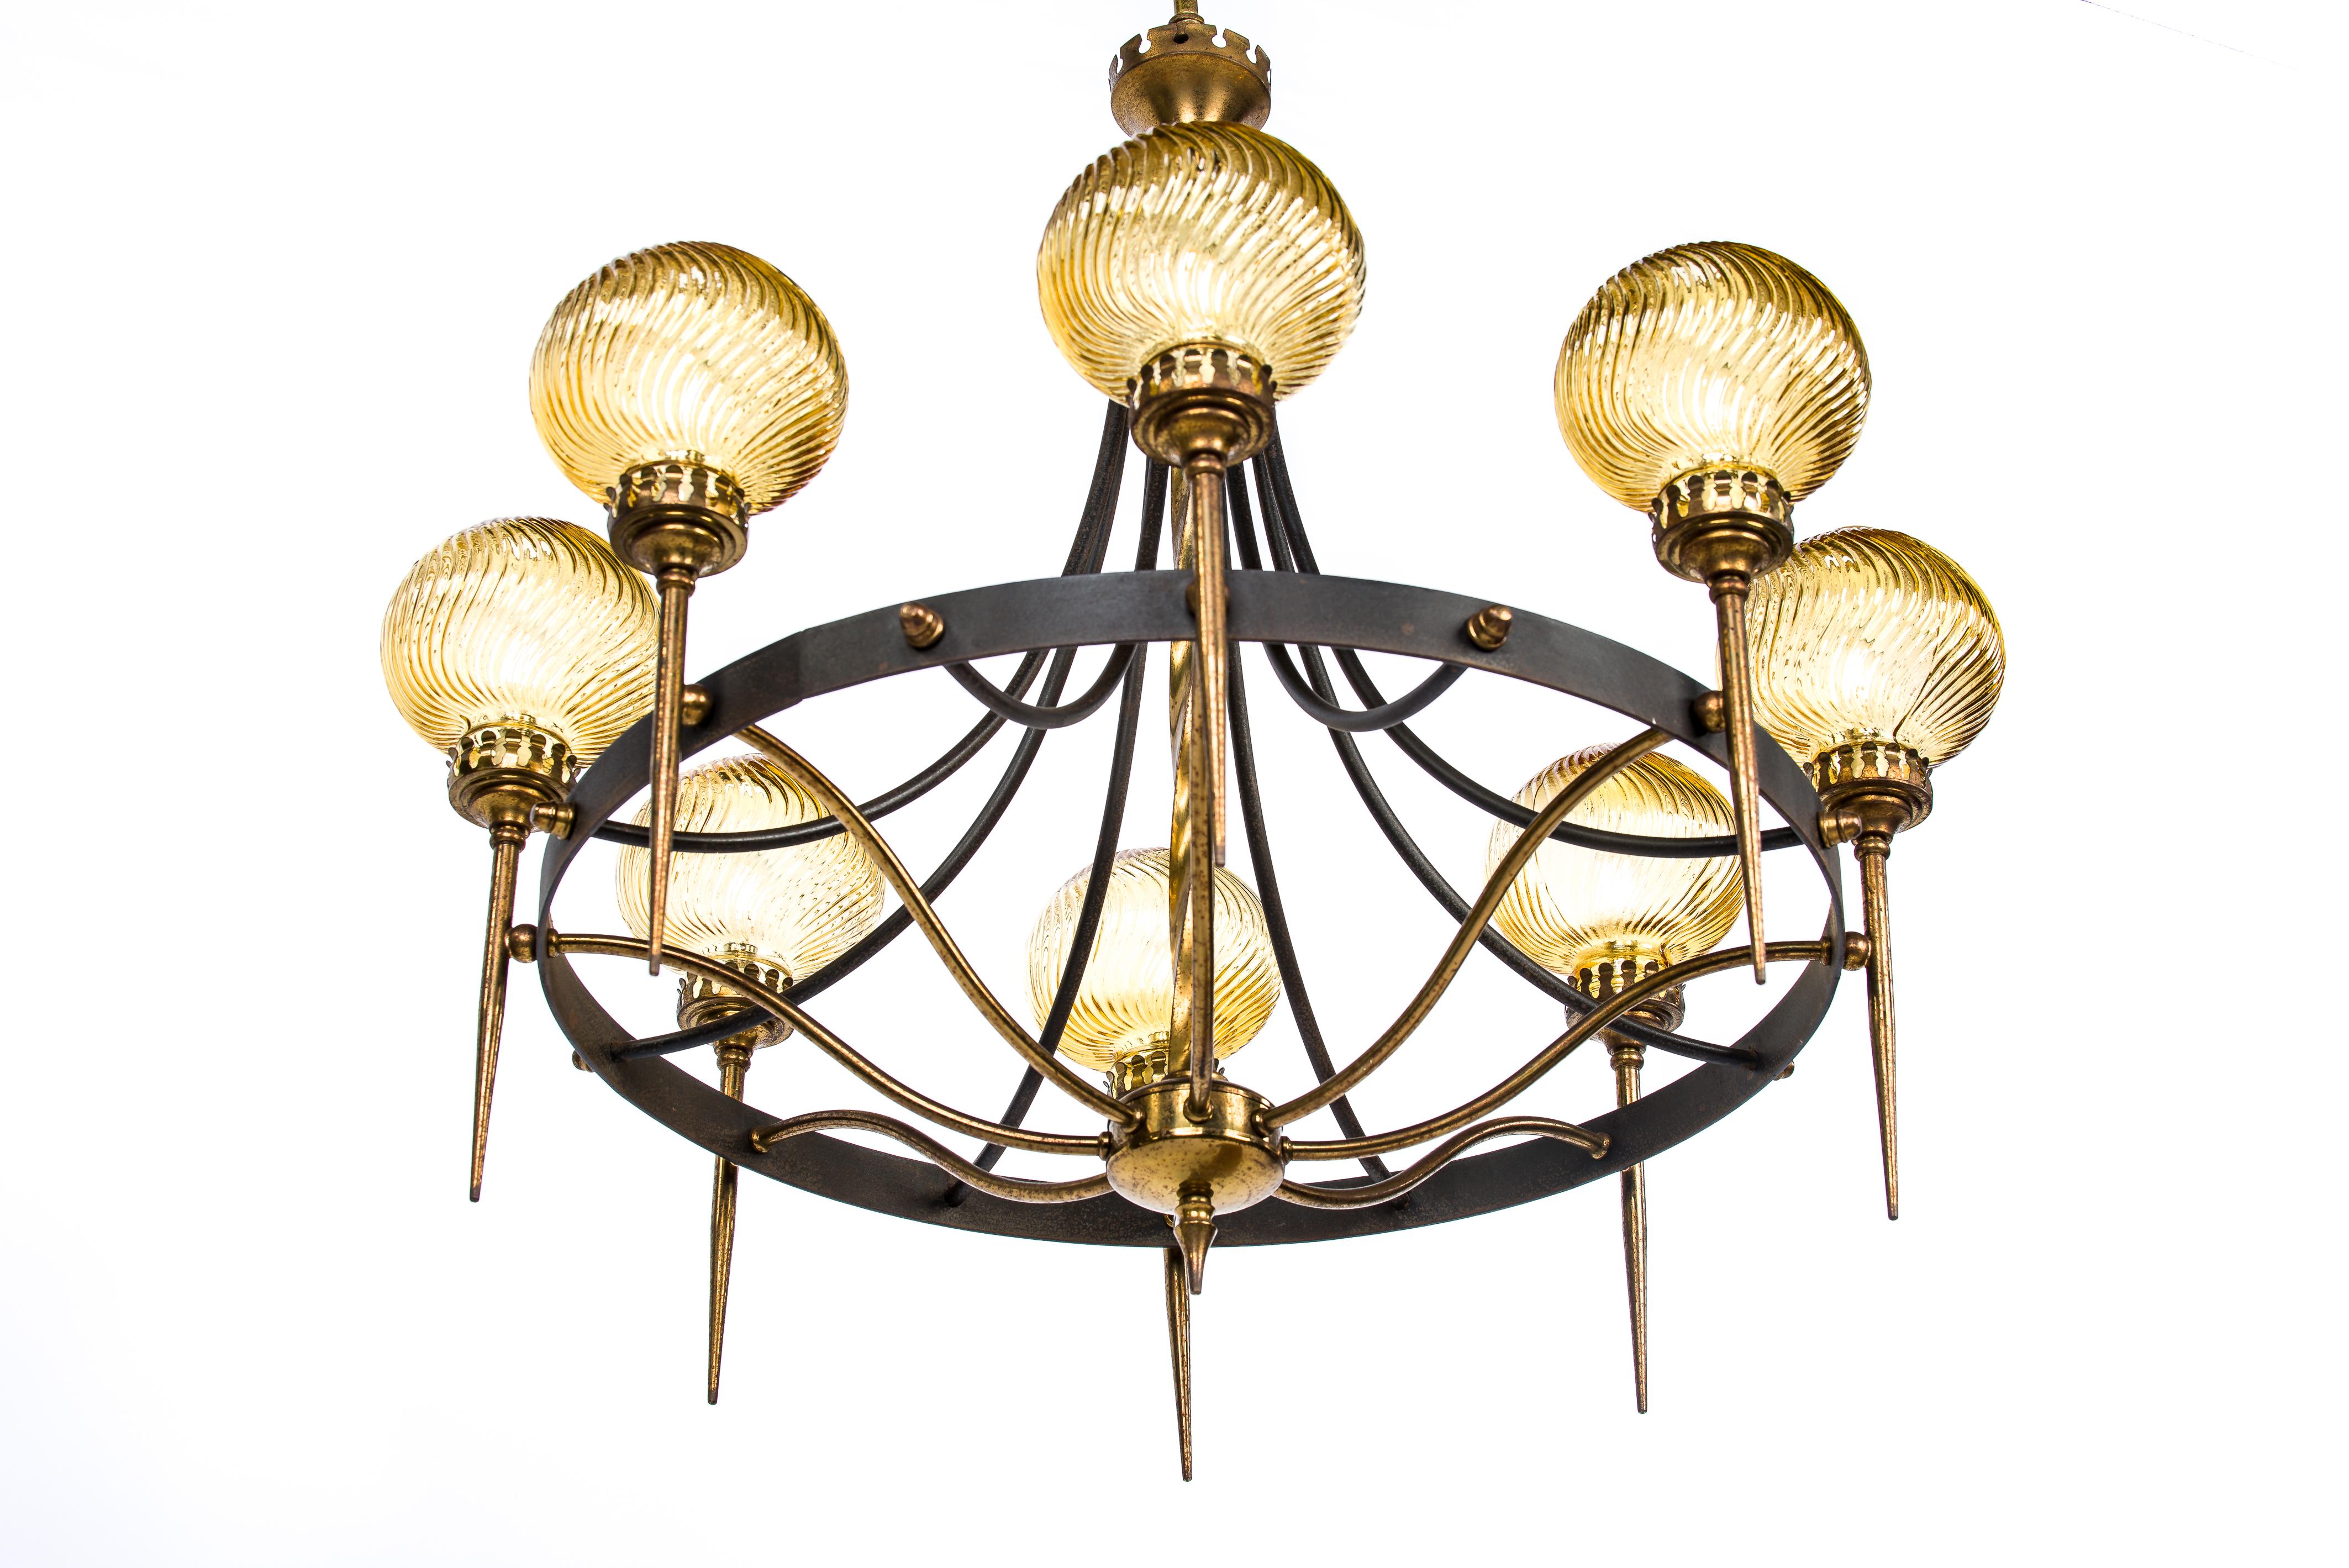 This elegant chandelier was made in France in the 1960s. It features a twisted central brass column with a black patinated steel ring supporting 8 brass torches. The torches end with beautiful yellow twisted glass covers. This one-of-a-kind